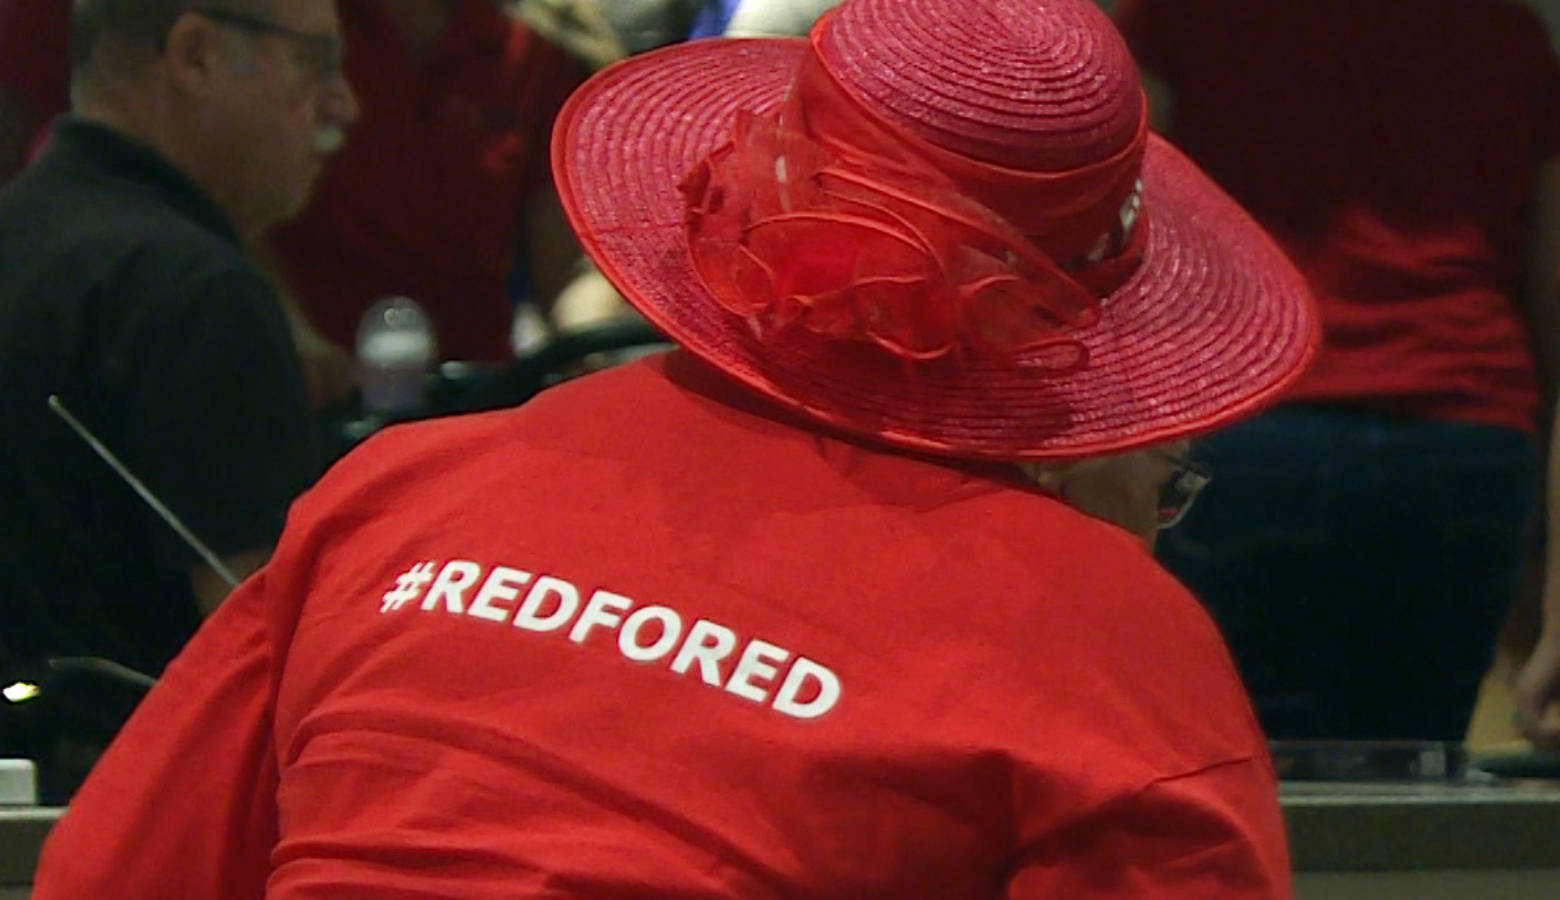 "Red for Ed" has become a rallying cry among public educators as they press lawmakers to boost pay and better support public schools. (Jeanie Lindsay/IPB News)